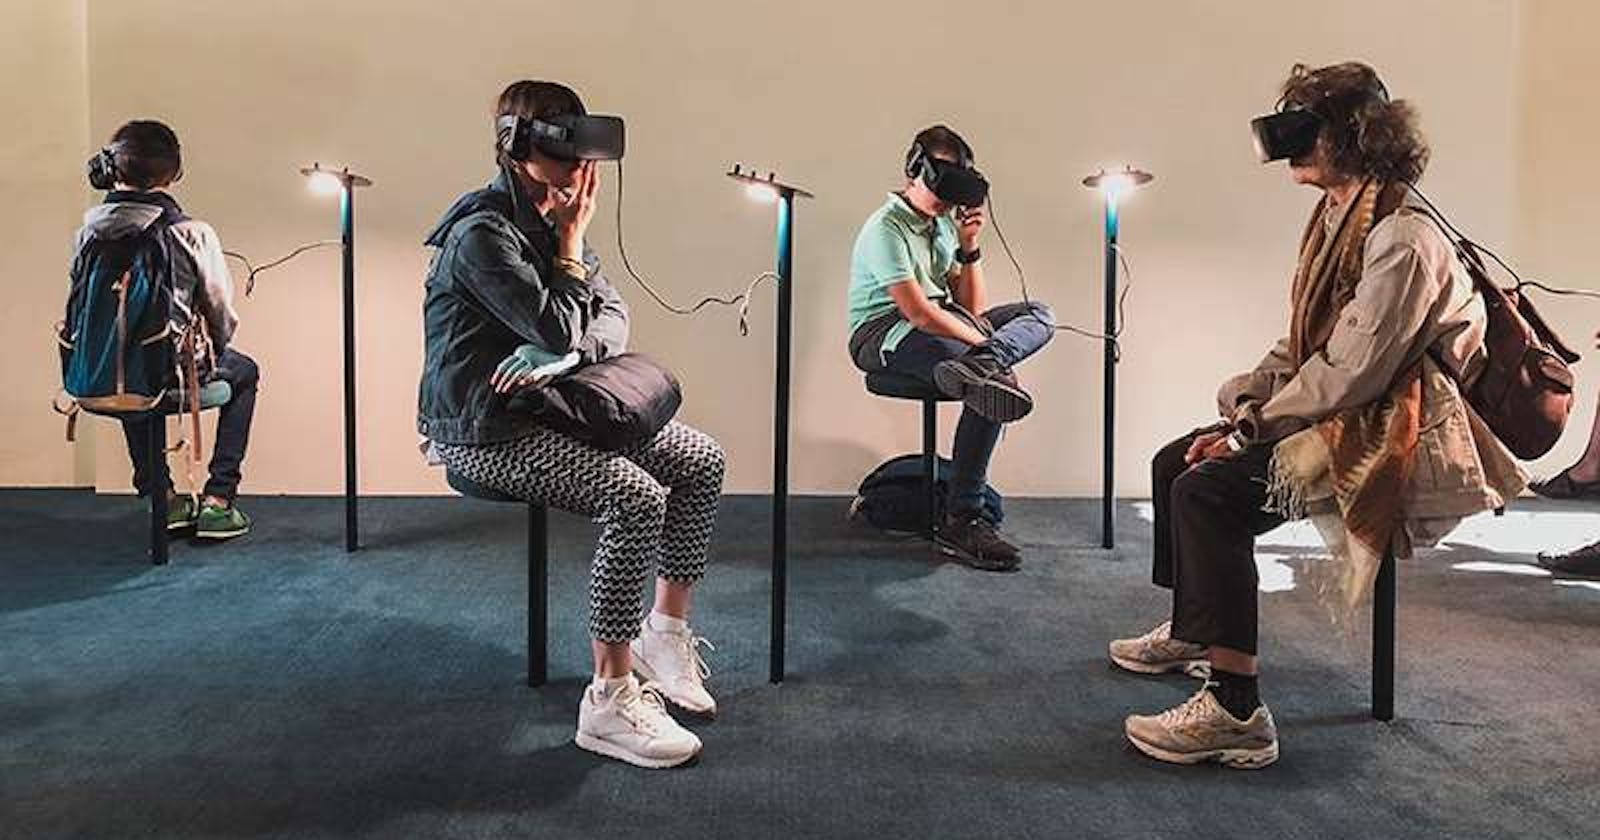 Redefining user interaction with VR